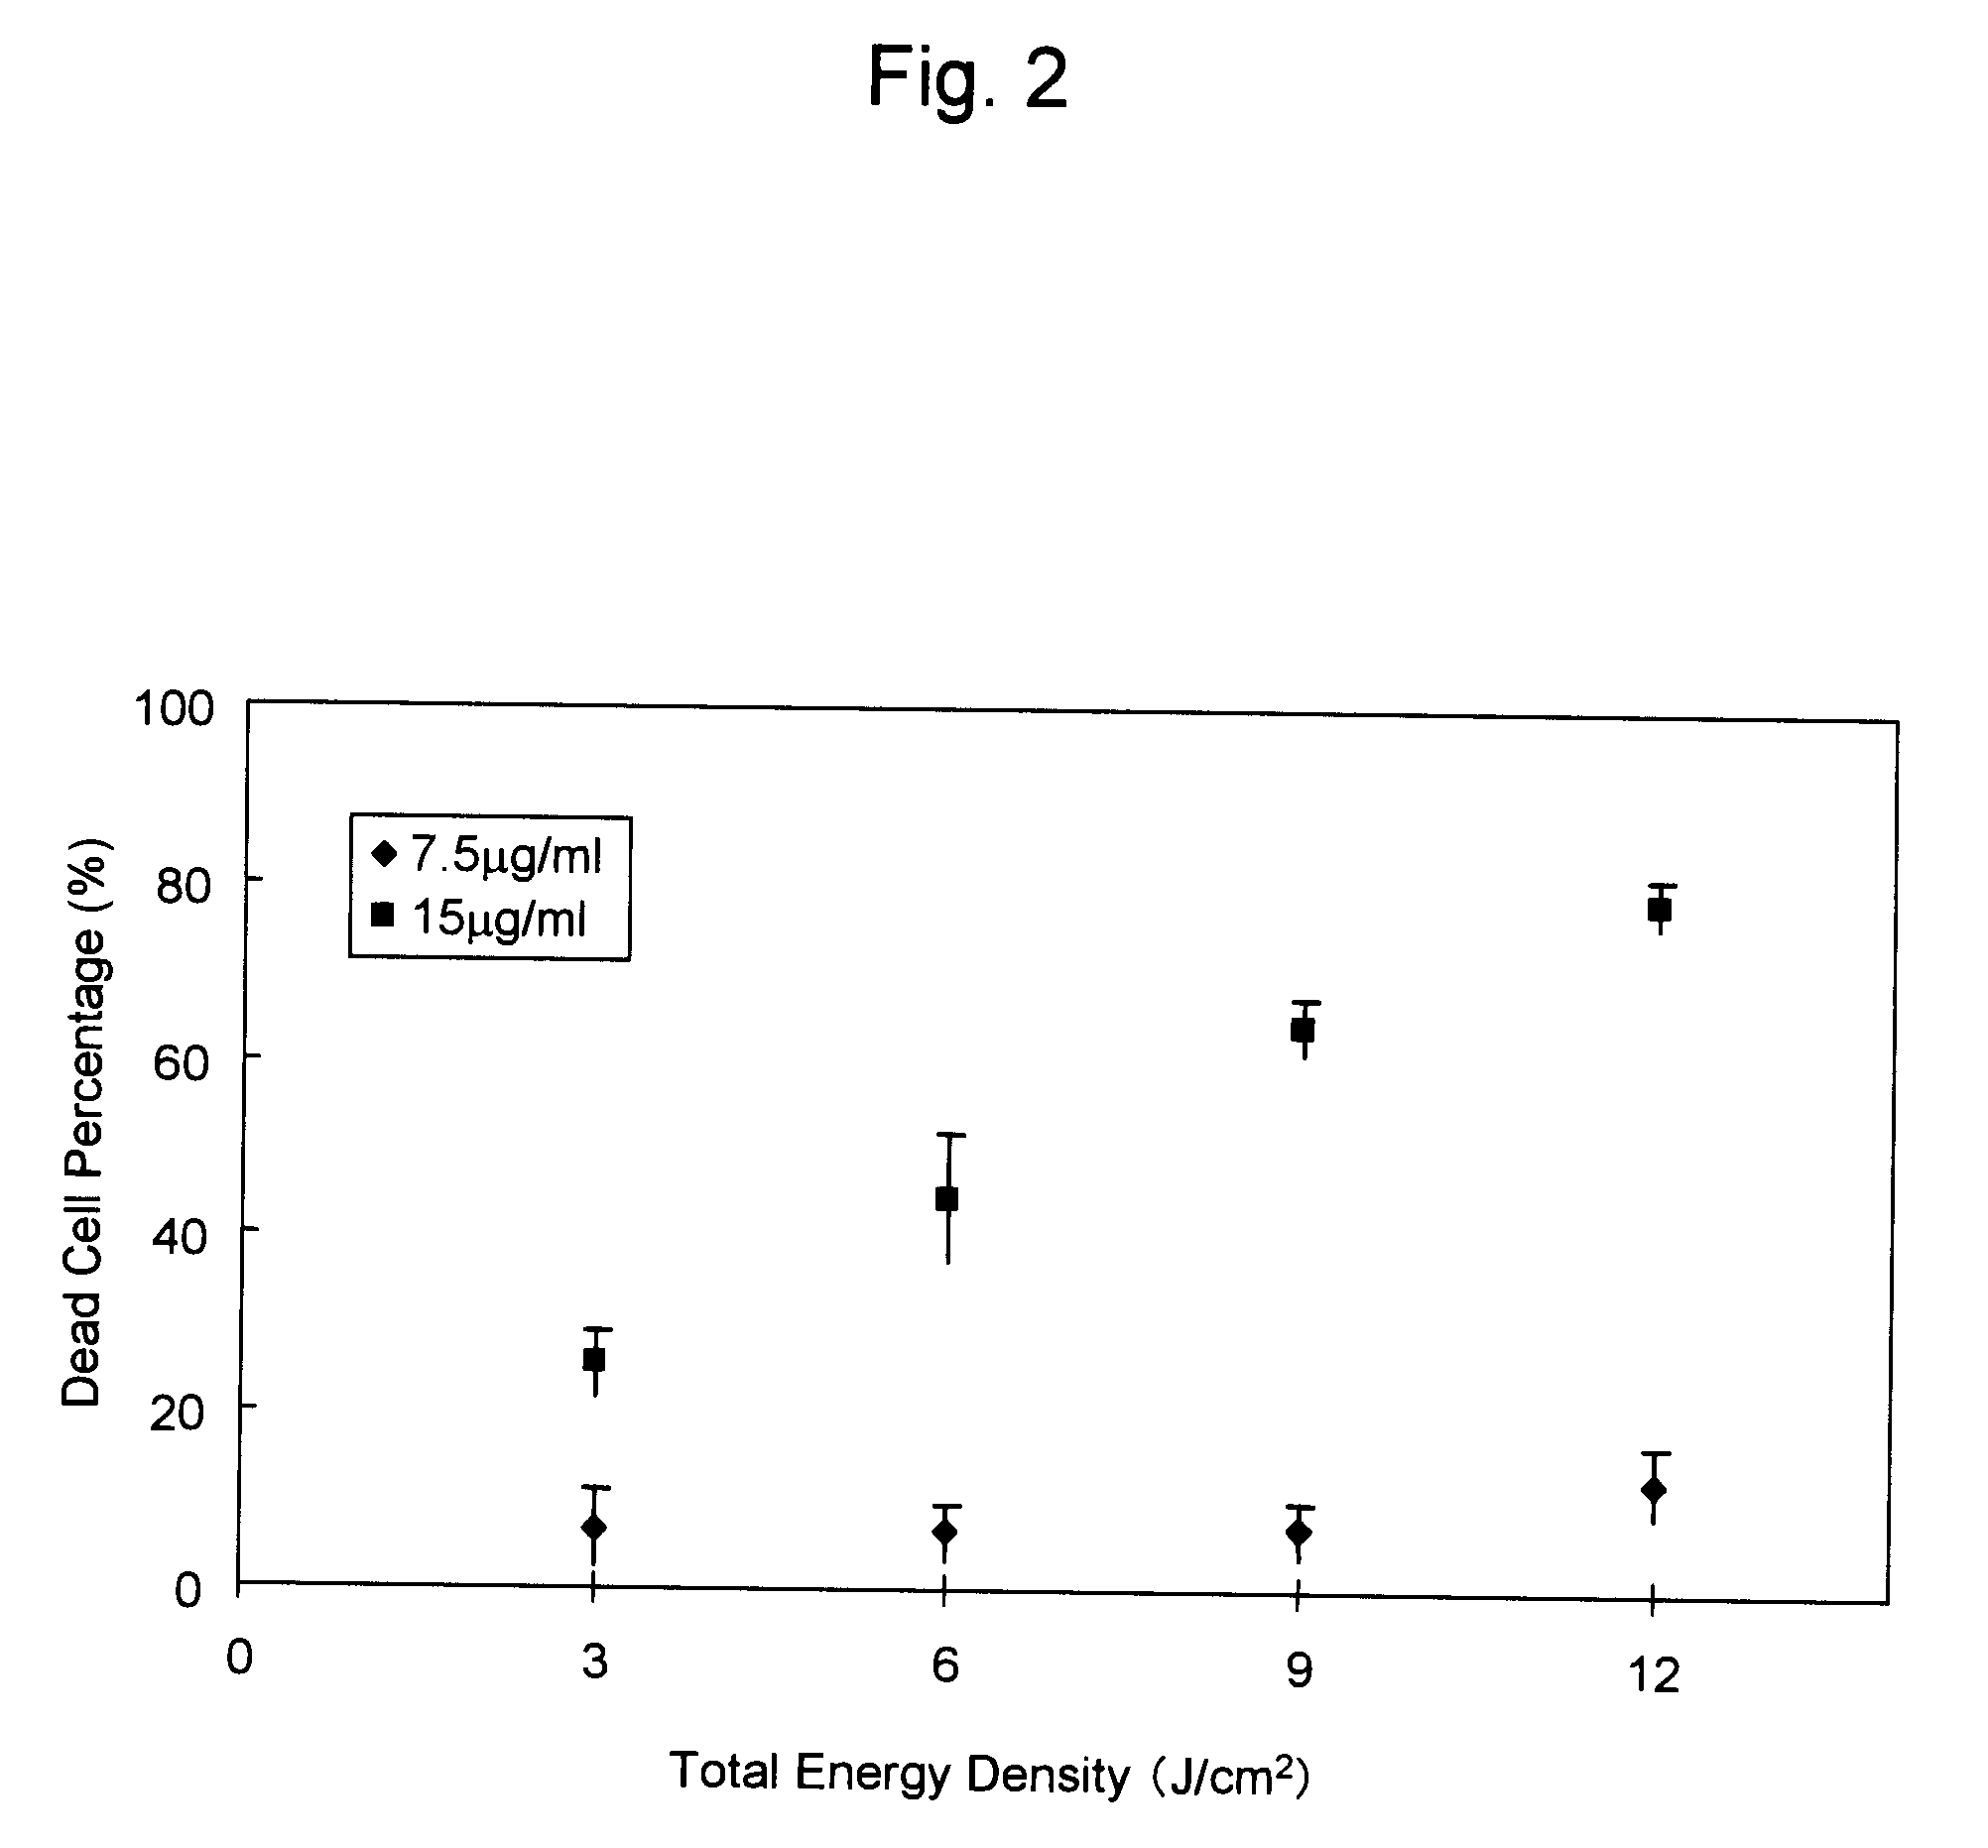 Abnormal electrical conduction blocking apparatus using photodynamic therapy (PDT)